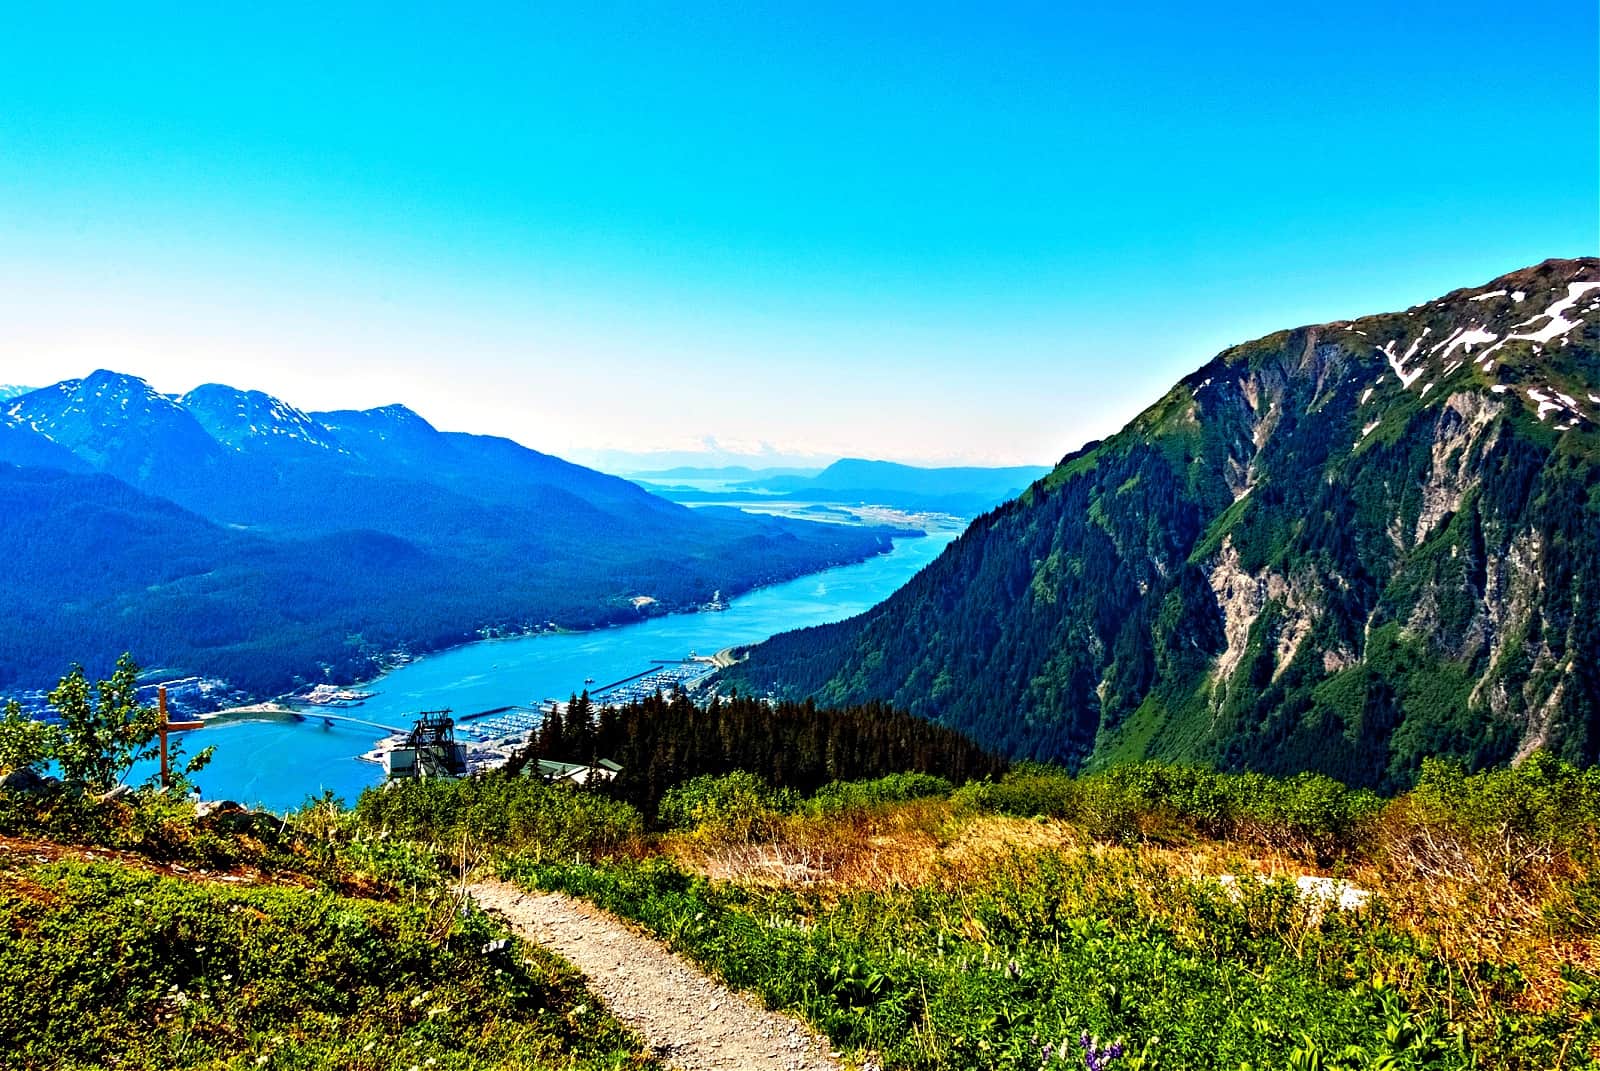 Scenic view of Gastineau Channel, Douglas Island, and Downtown Juneau from the top of Mt. Juneau in Alaska during Summer